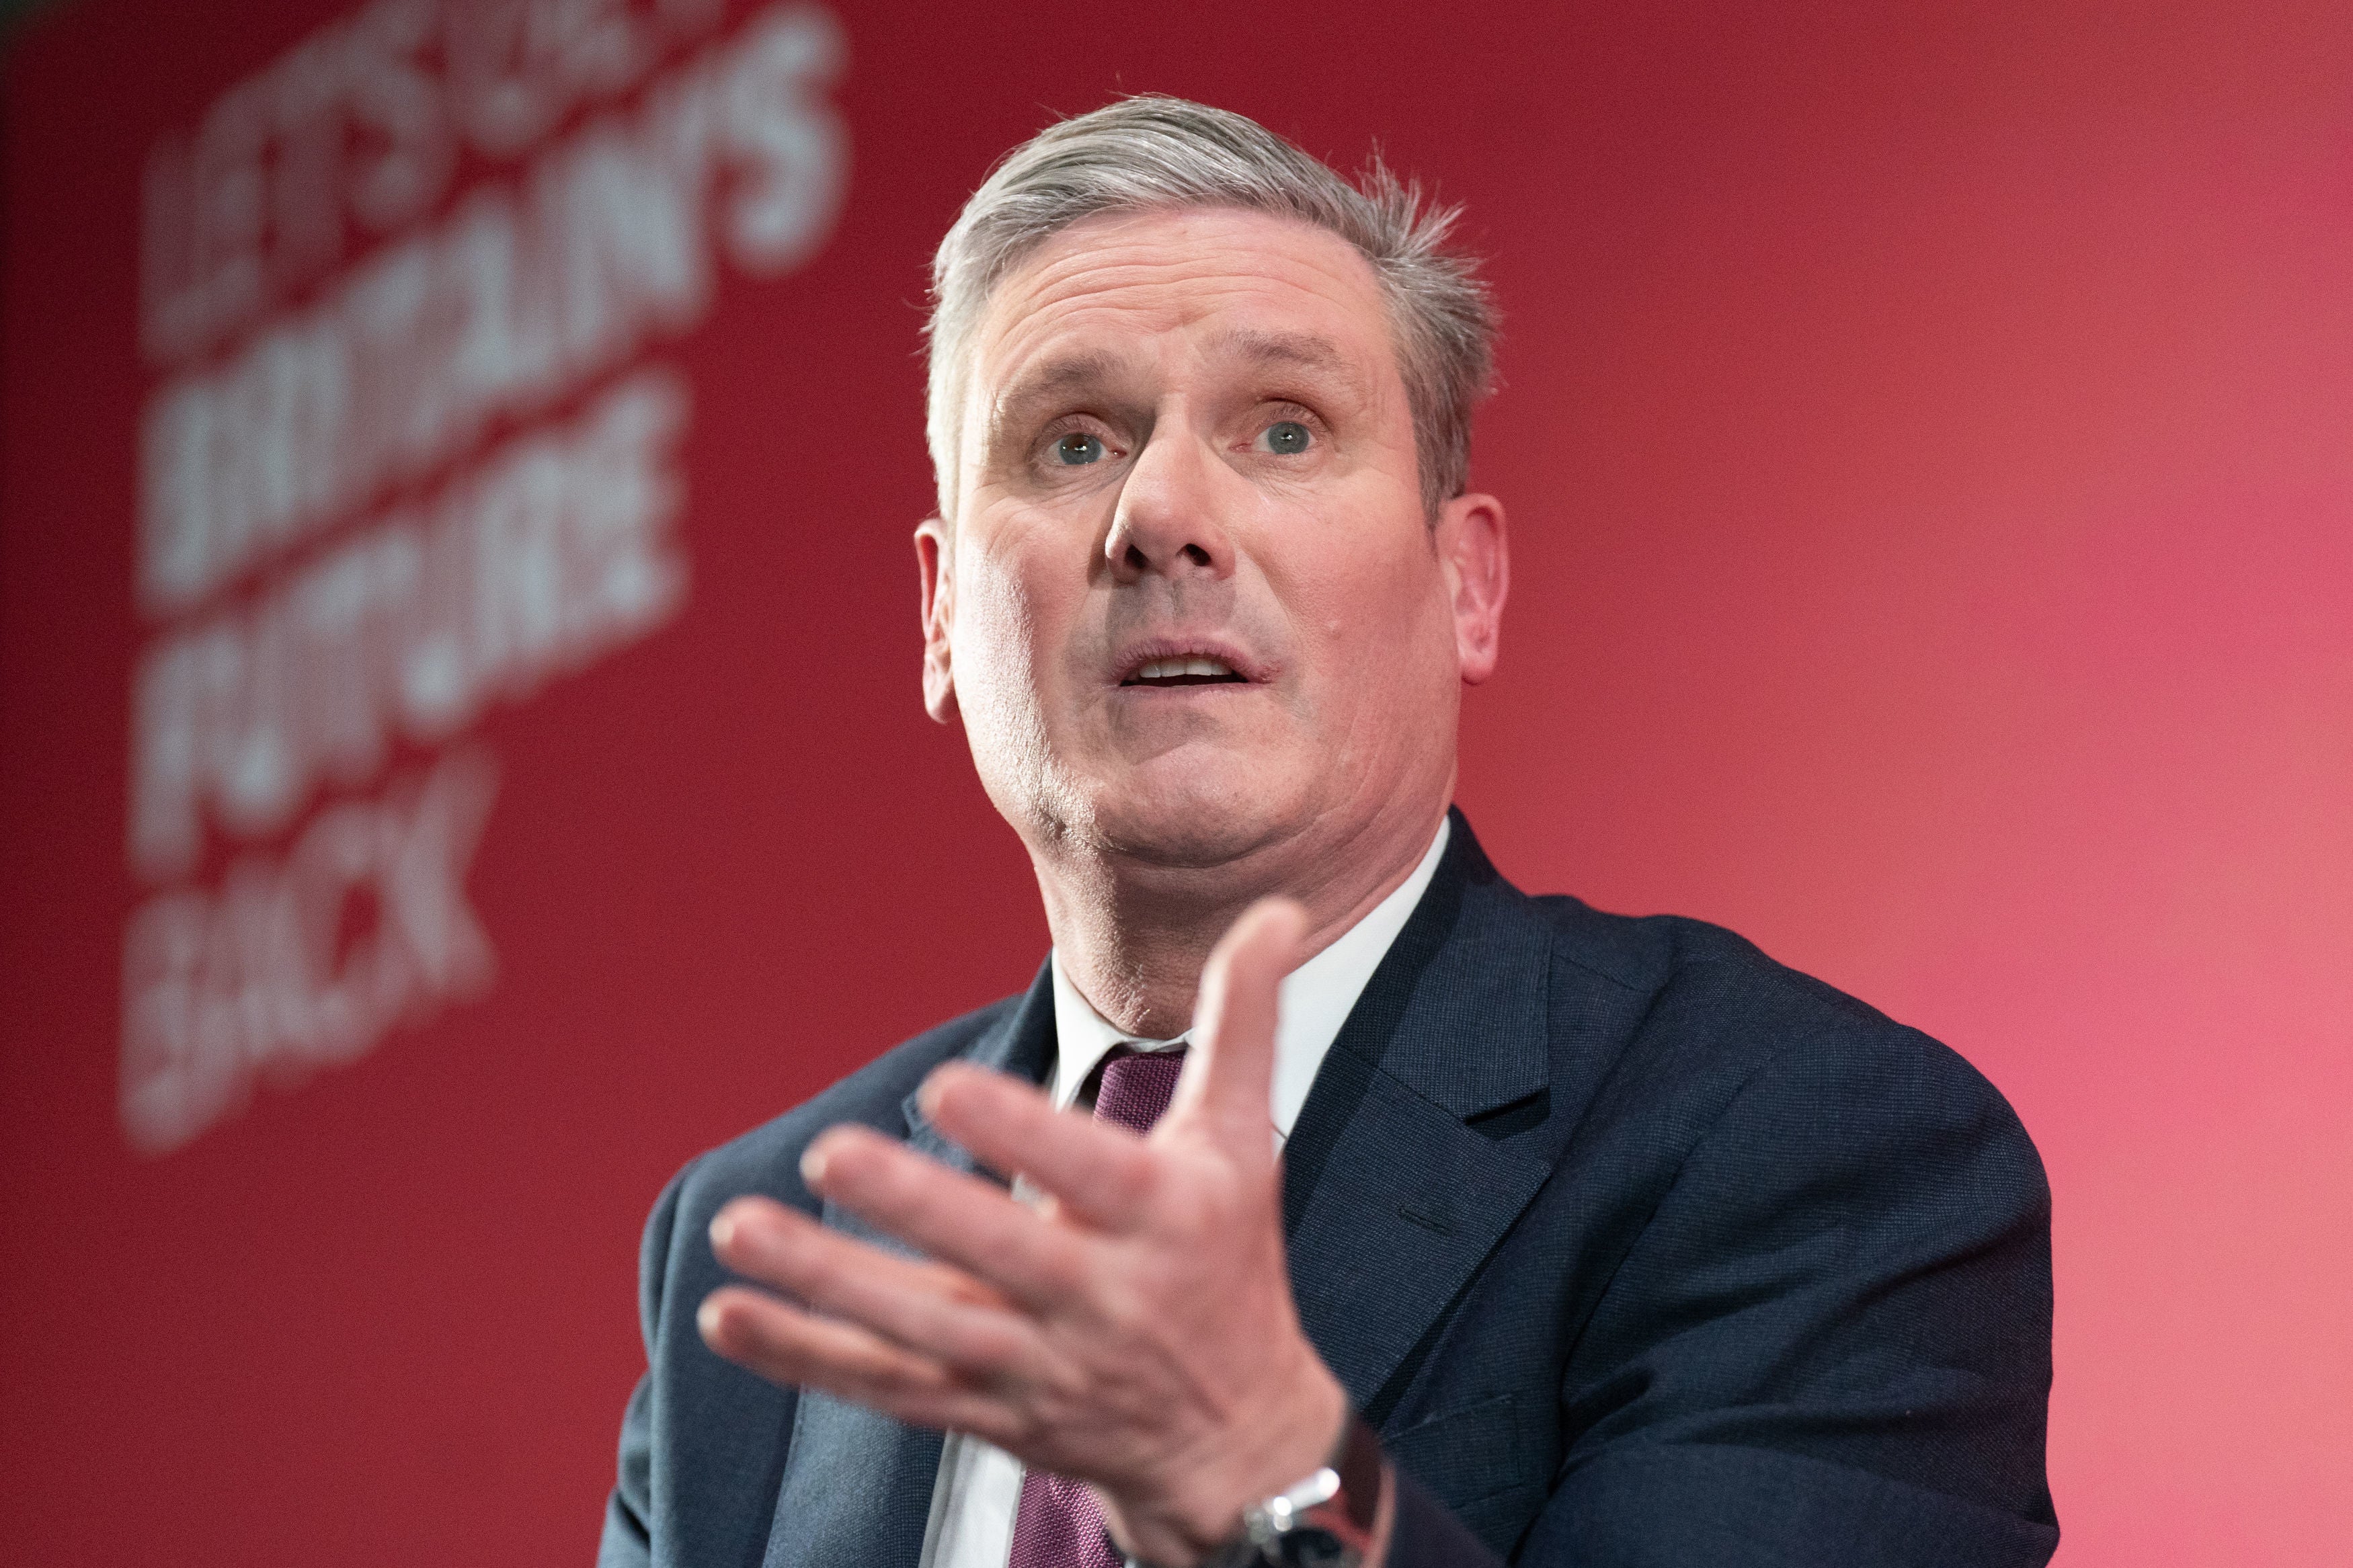 Keir Starmer made his latest pitch to woo big business